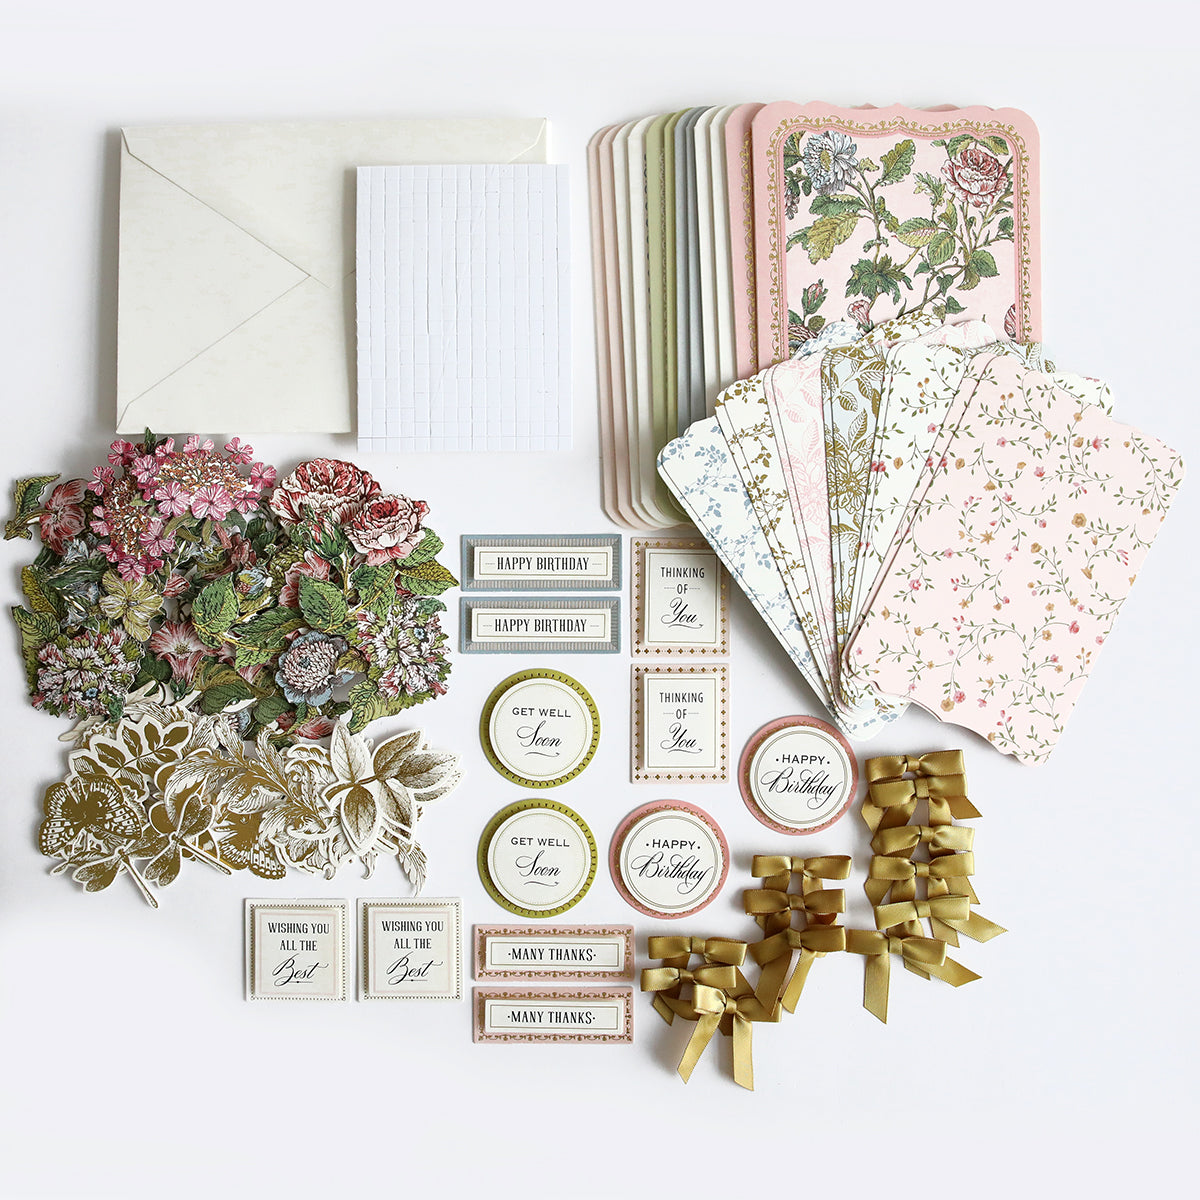 An assortment of handmade cards, including those from the Simply Wildflower Meadow Card Making Kit, and decorative stickers with 3D embellishments laid out on a white background.